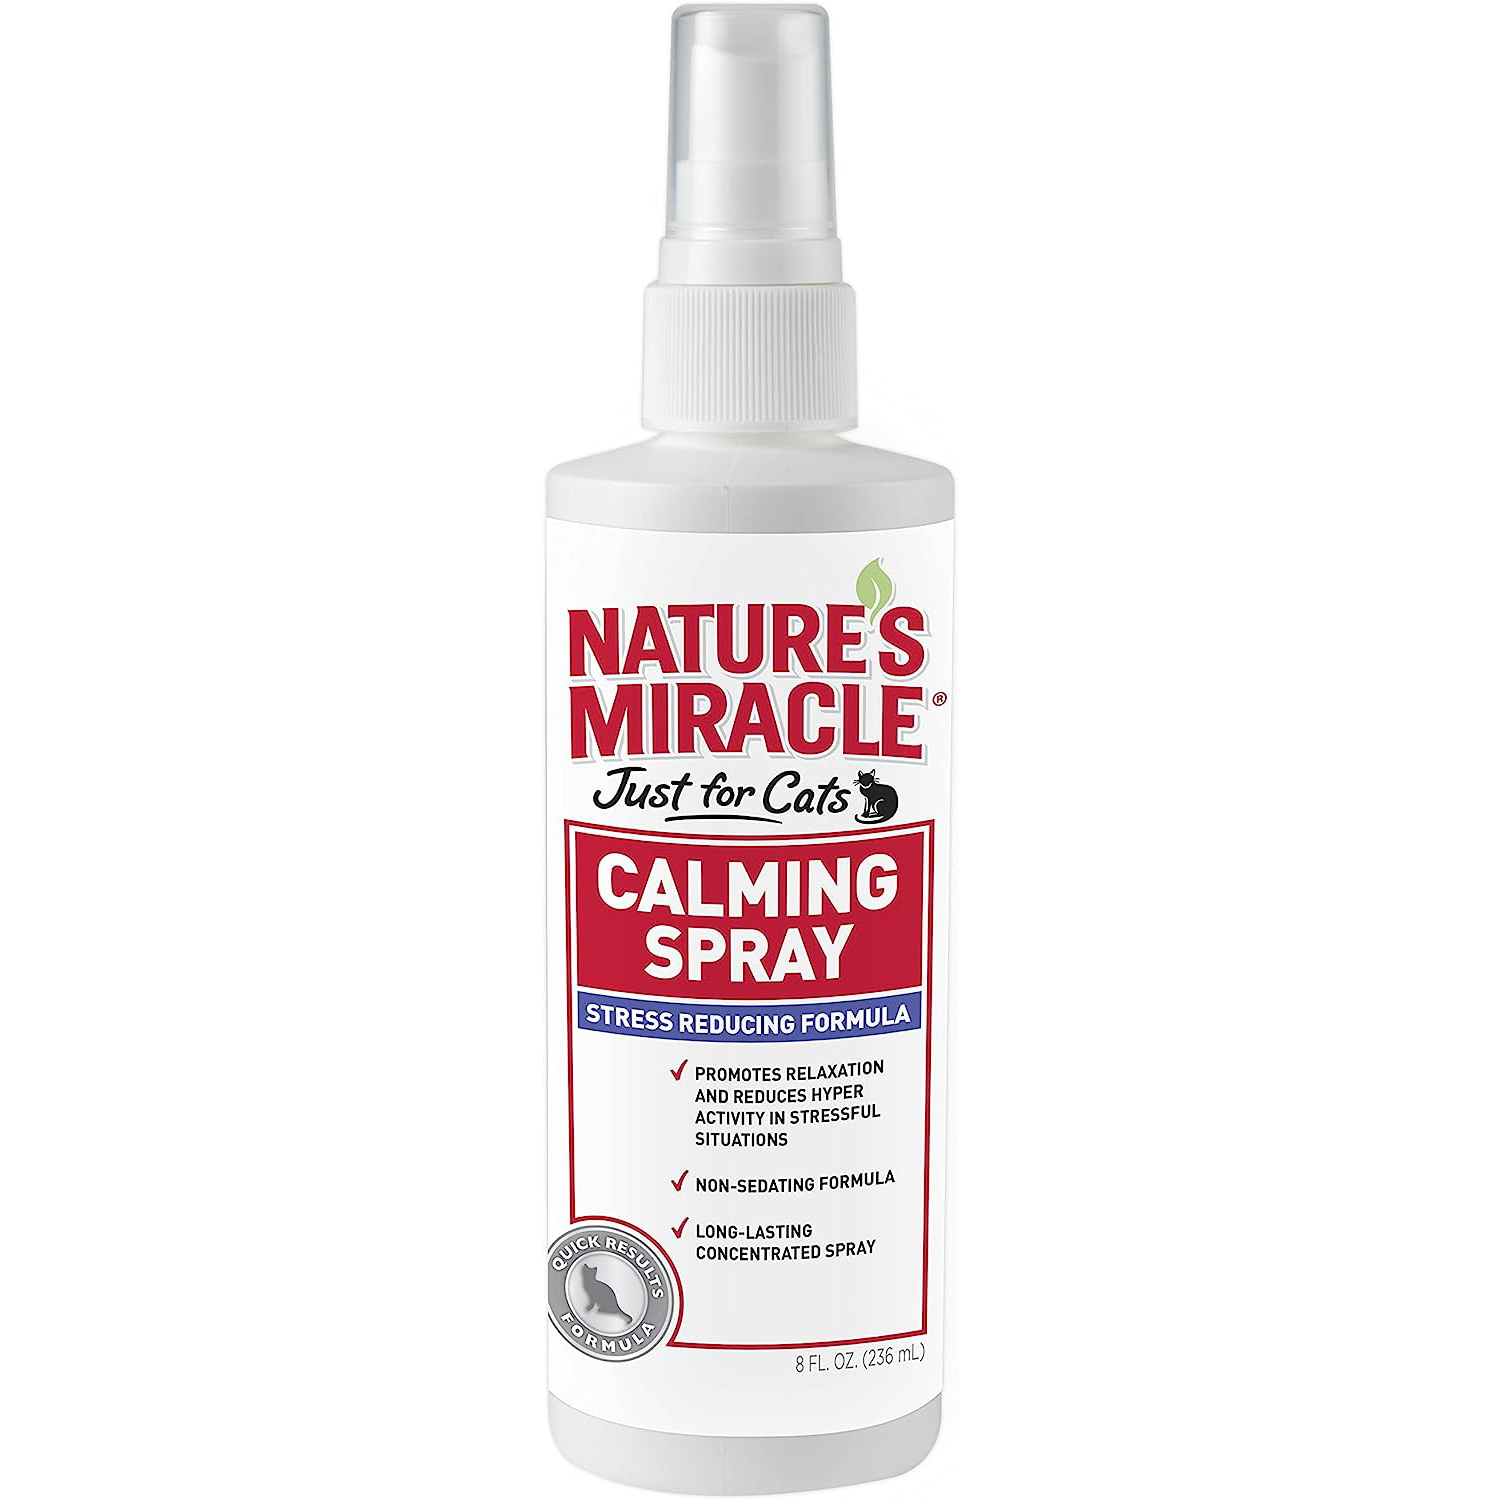 Nature's Miracle Just for Cats Calming Spray Stress Reducing Formula